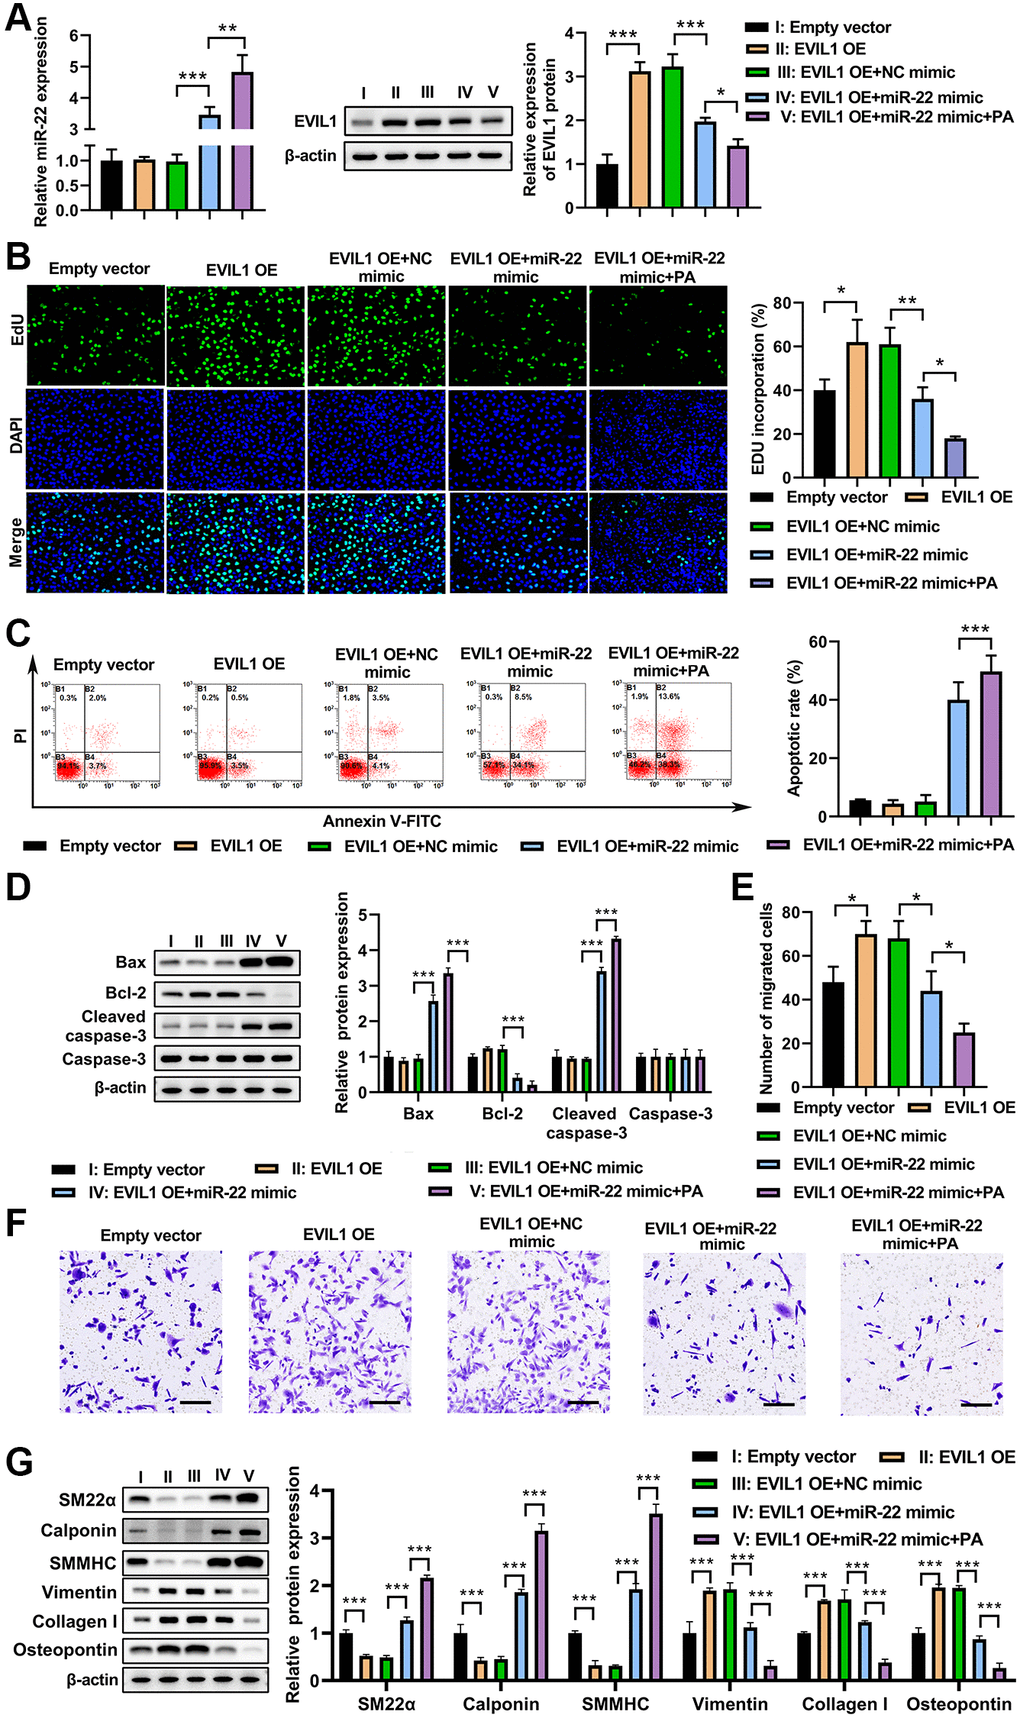 PA treatment enhanced miR-22 mimic impacts on aborted the inhibitive effect of EVI1 on VSMC phenotype switch. (A) Expression of miR-22 and EVIL1 in VMSCs treated with EVI1 or/and miR-22 overexpression followed by PA treatment. (B) Cell proliferation was detected by EdU in VSMCs with EVI1/miR-22 overexpression followed by PA treatment. (C) Flow cytometry to detect the apoptosis of VSMCs with EVI1/miR-22 overexpression followed by PA treatment. (D) Western blot to detect the apoptosis associated markers in VSMCs. (E, F). Cell migration was detected by transwell assay in EVI1/miR-22-overexpressed VSMCs followed by PA treatment. Scale bar = 100 μm. (G) Protein levels of SM22α, calponin, SMMHC, vimentin, collagen I, and osteopontin in VSMC in VSMCs with EVI1/miR-22 overexpression followed by PA treatment detected by western blot. n = 3. *P **P 